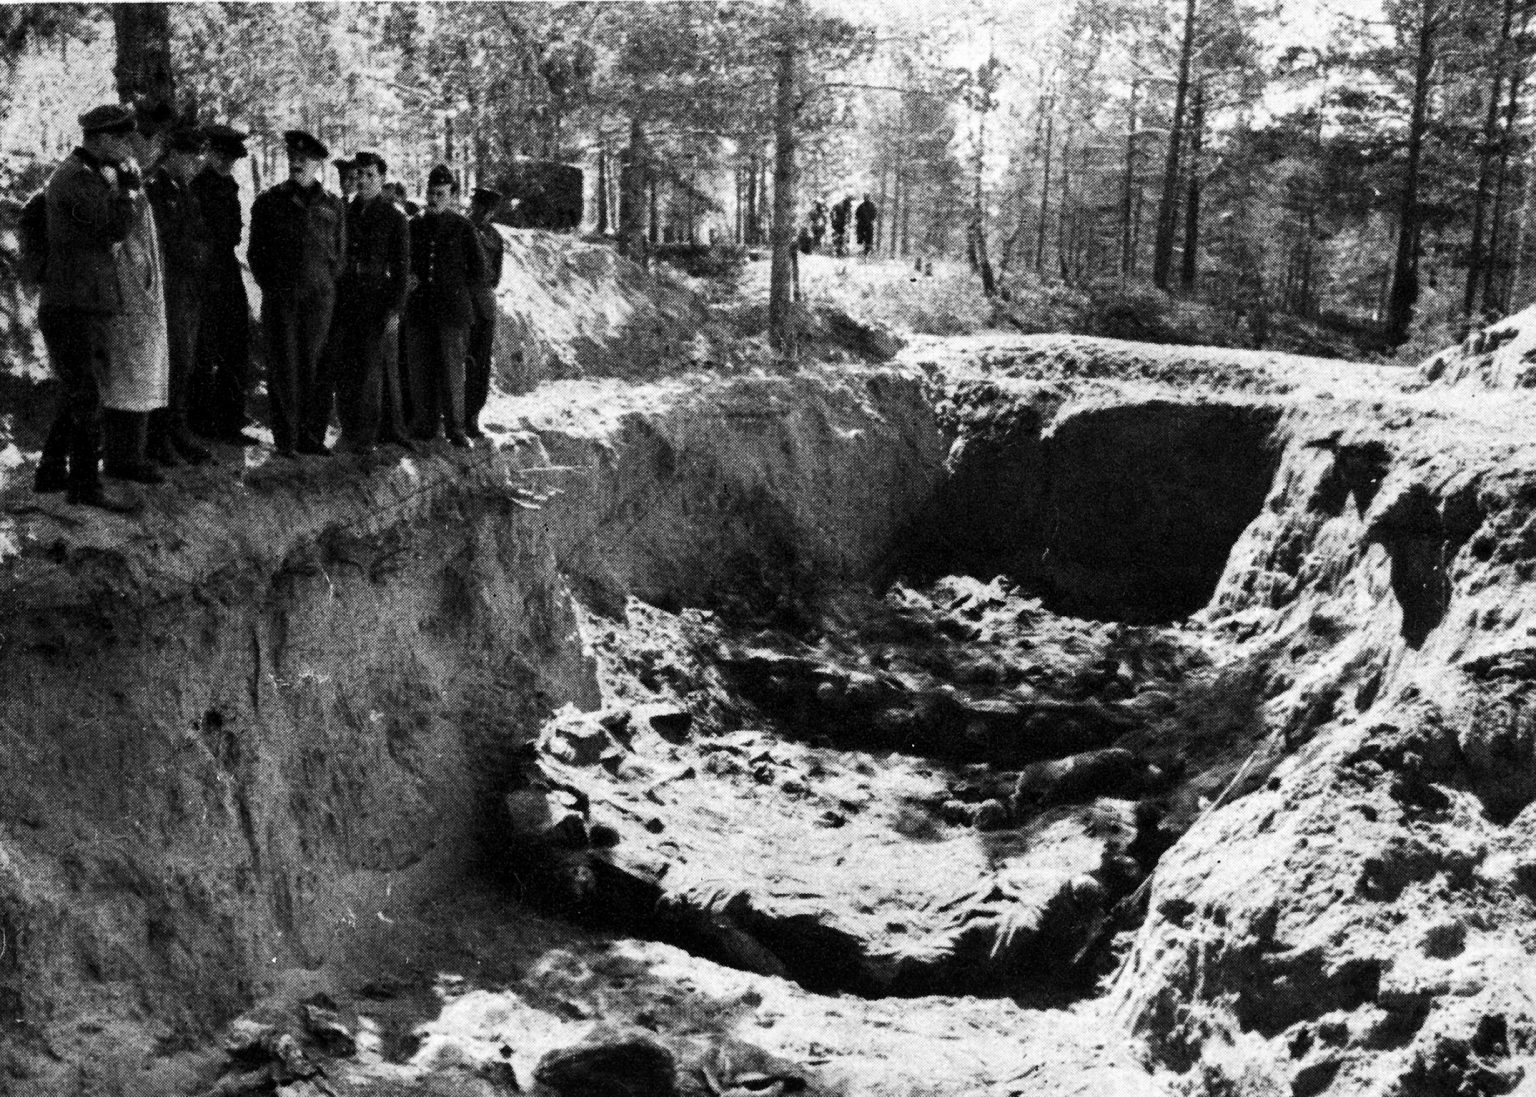 <em>The mass graves were discovered by the Germans in 1943 (Public Domain)</em>